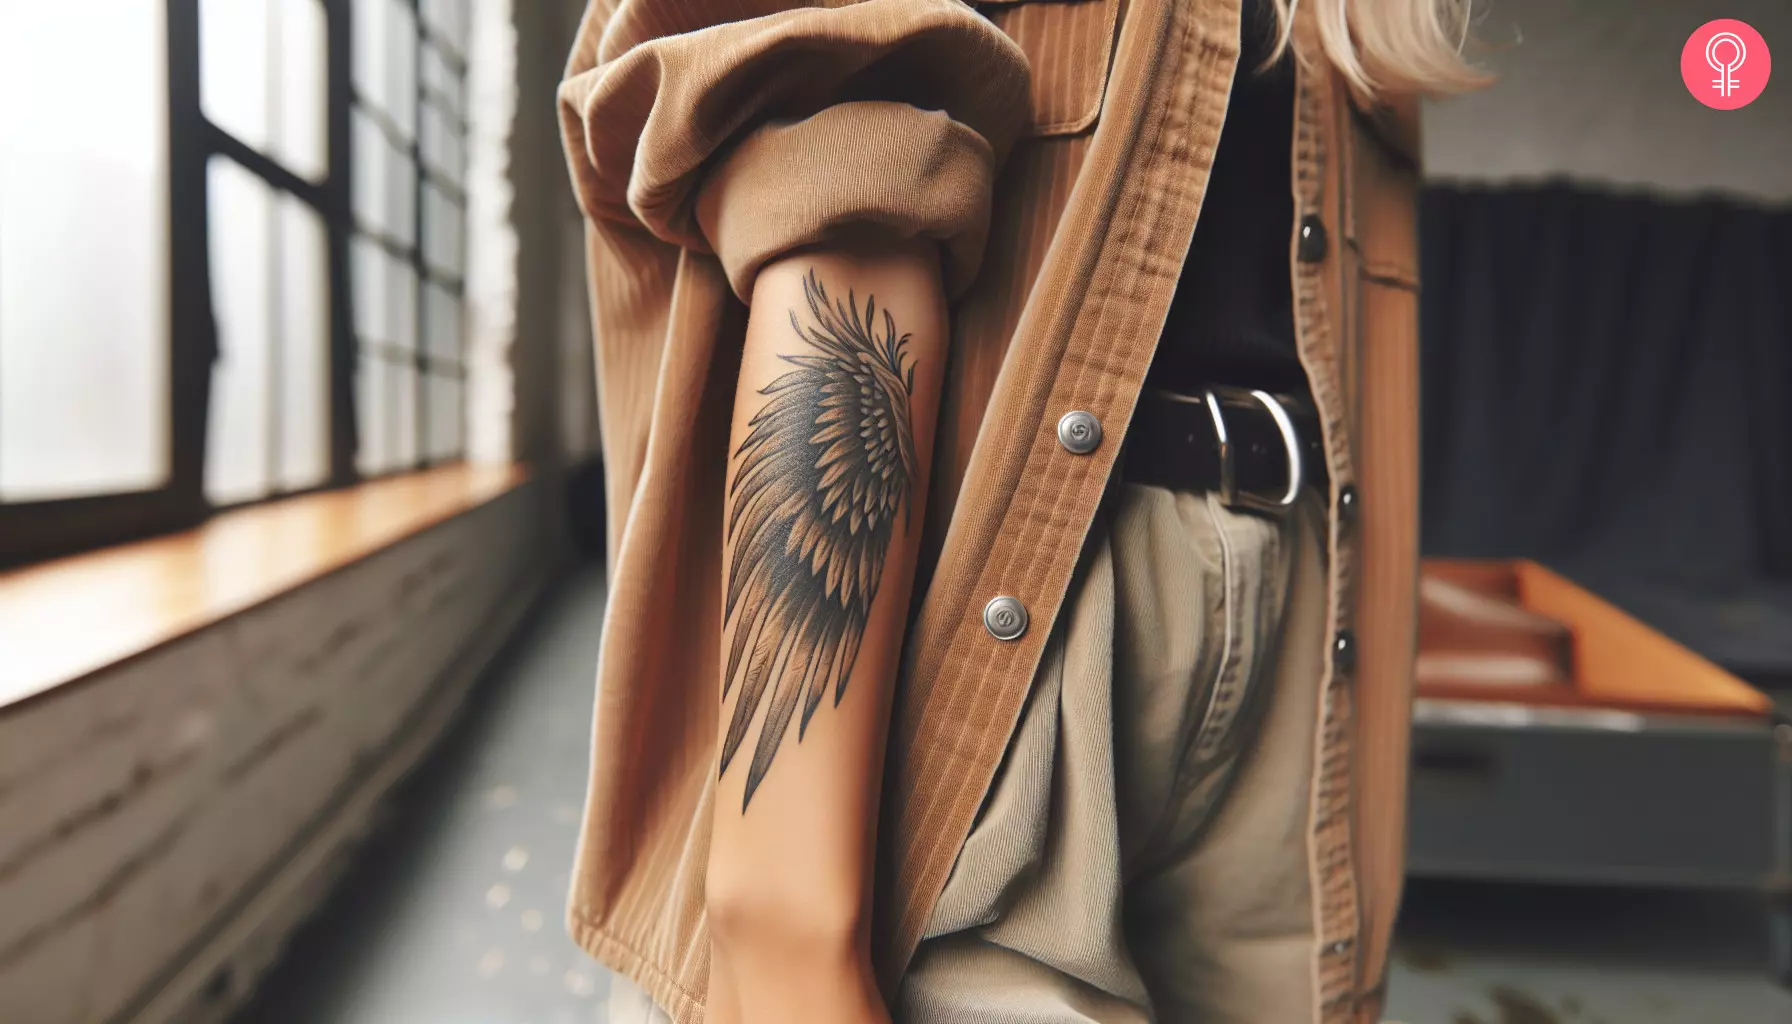 A wing tattoo design on the forearm of a woman